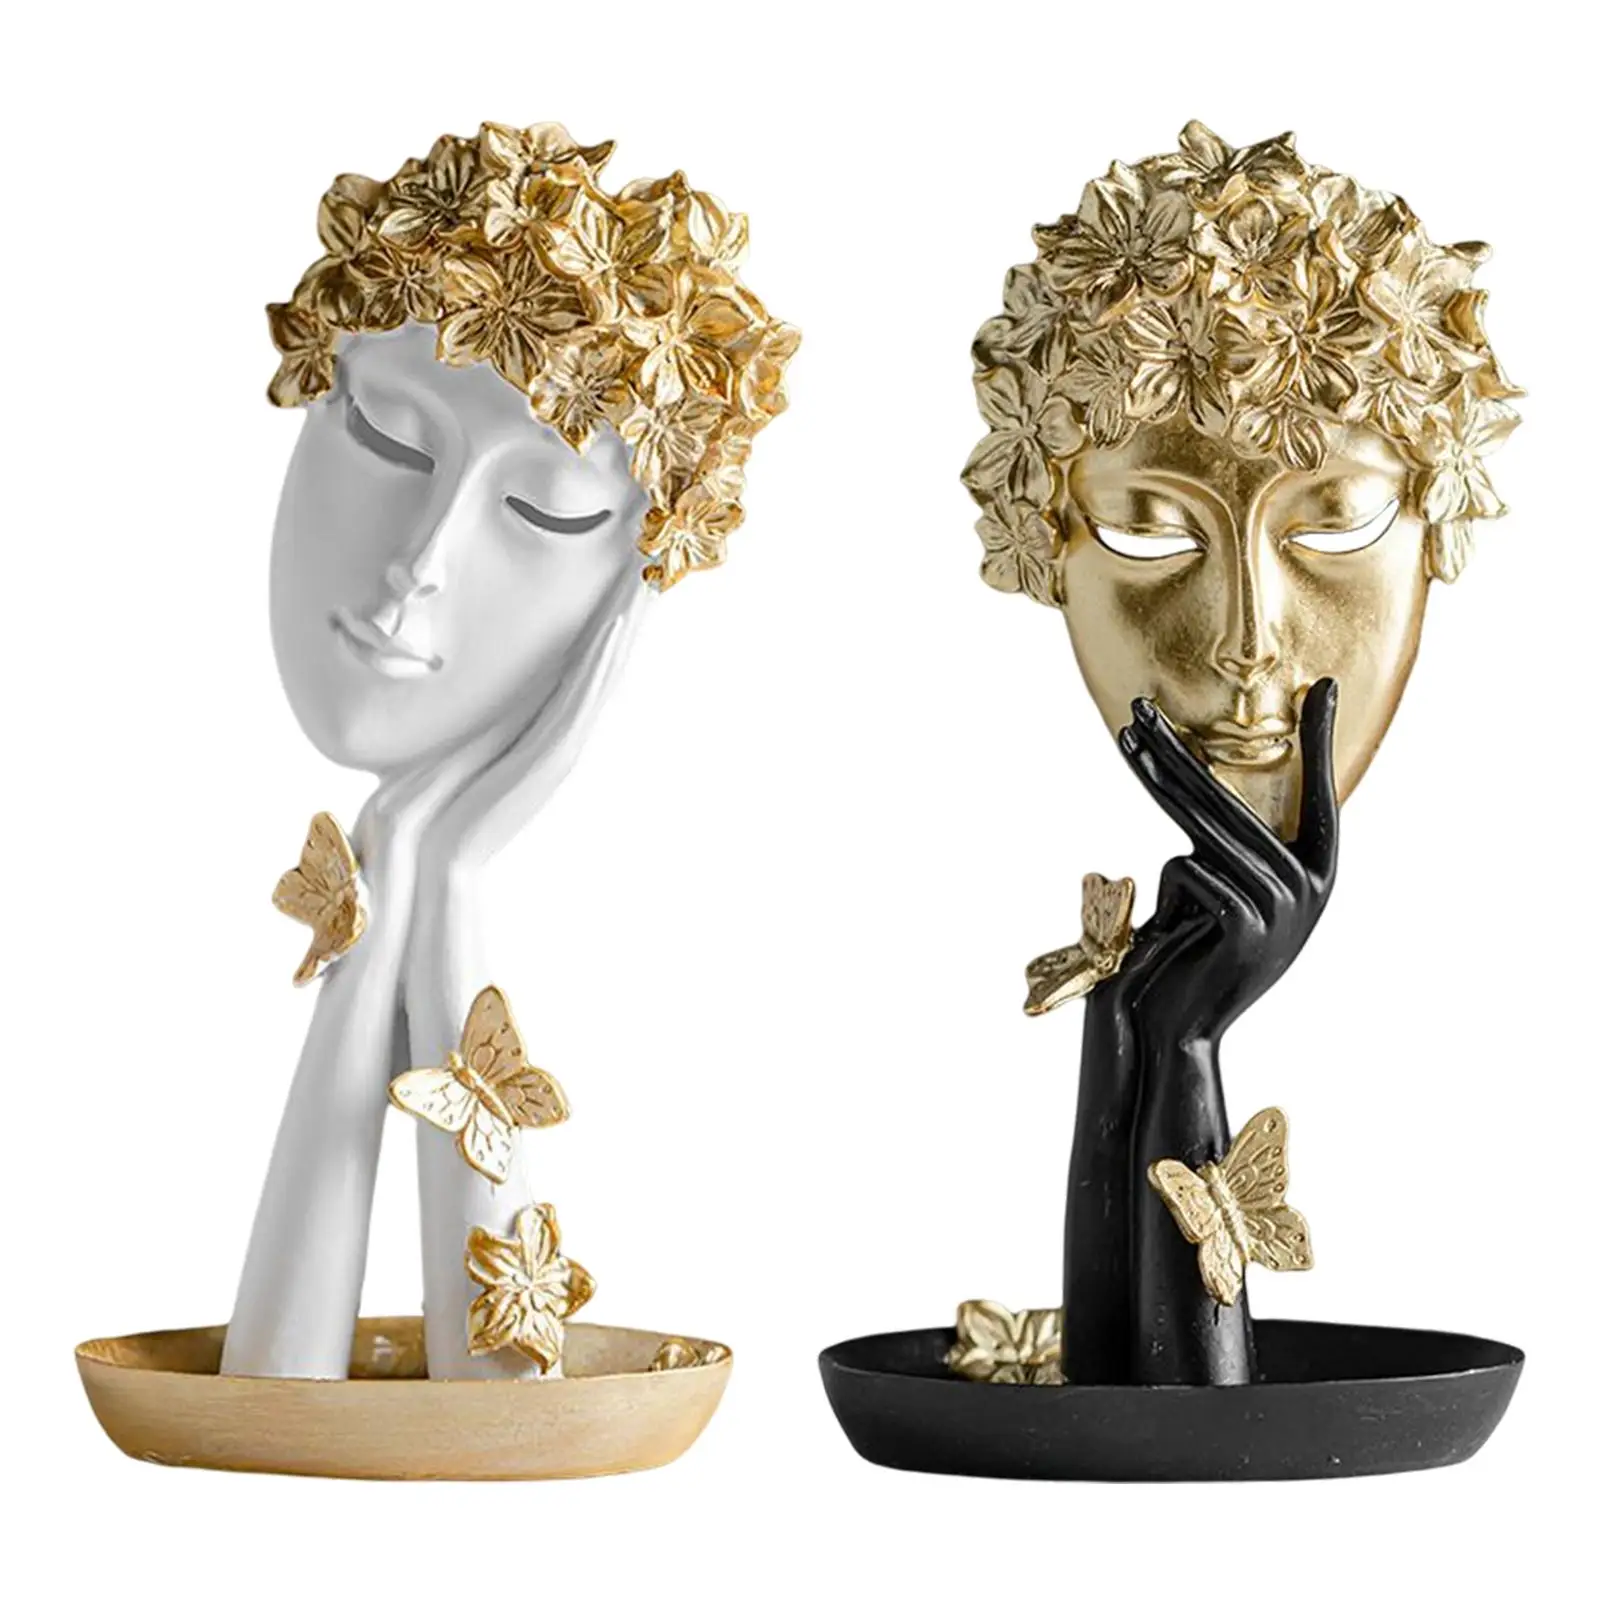 Abstract Face Thinker Statue Figurine Artwork Ornaments Character for Desk Bookcase Birthday Gifts Living Room Bookshelf Decor